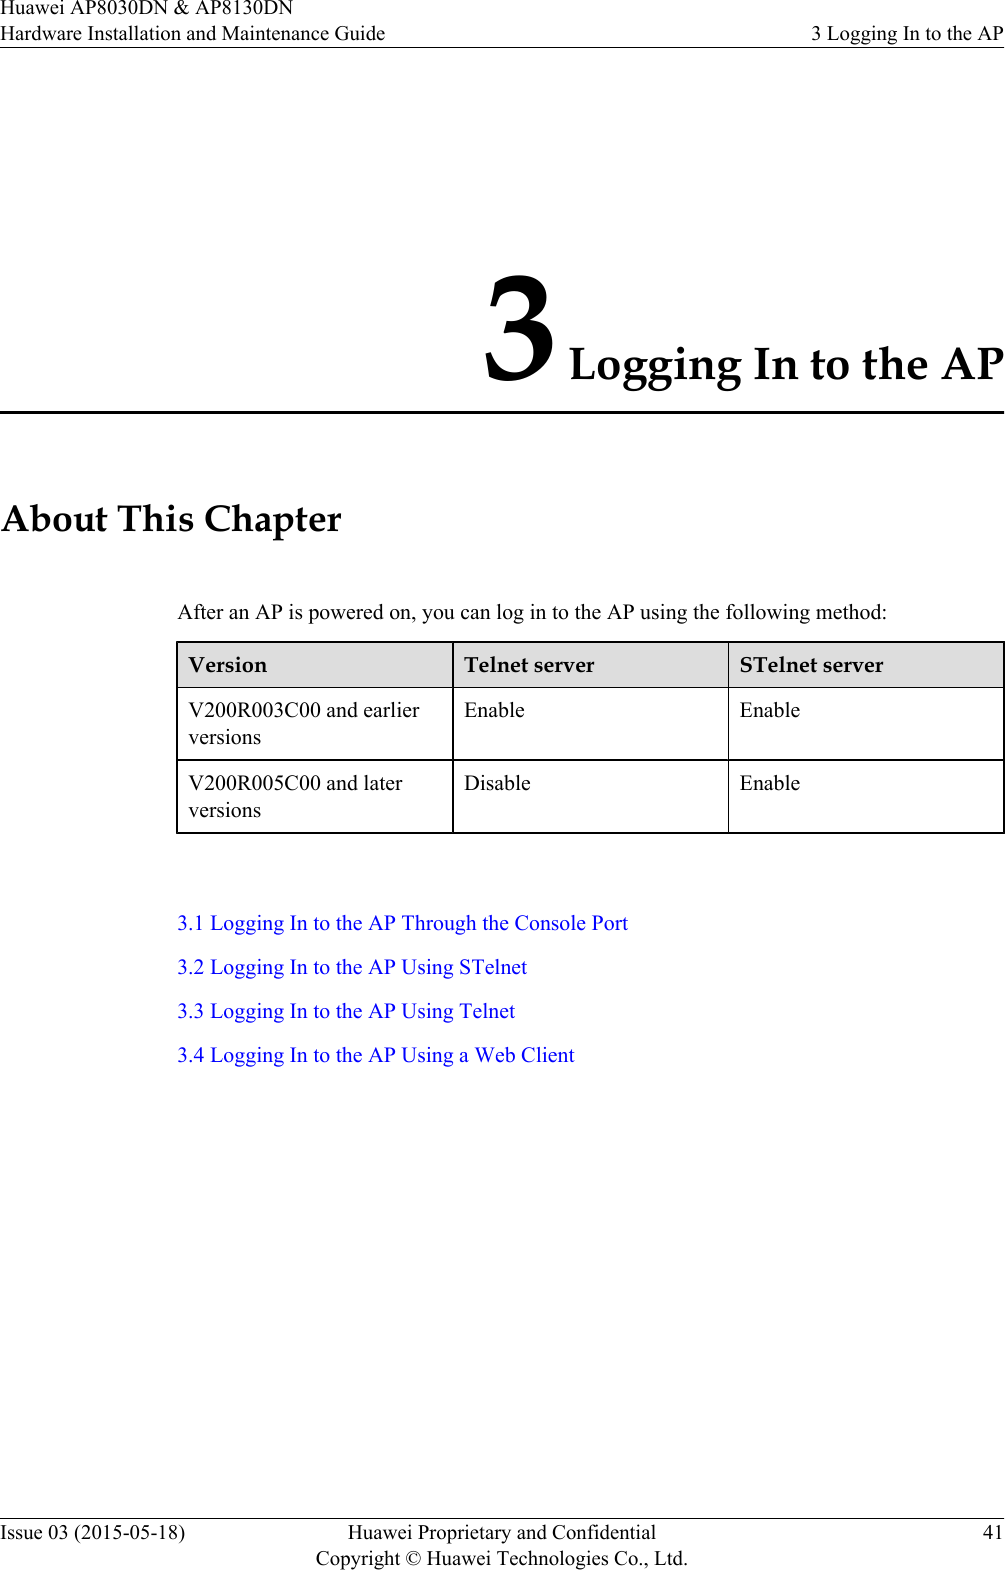 3 Logging In to the APAbout This ChapterAfter an AP is powered on, you can log in to the AP using the following method:Version Telnet server STelnet serverV200R003C00 and earlierversionsEnable EnableV200R005C00 and laterversionsDisable Enable 3.1 Logging In to the AP Through the Console Port3.2 Logging In to the AP Using STelnet3.3 Logging In to the AP Using Telnet3.4 Logging In to the AP Using a Web ClientHuawei AP8030DN &amp; AP8130DNHardware Installation and Maintenance Guide 3 Logging In to the APIssue 03 (2015-05-18) Huawei Proprietary and ConfidentialCopyright © Huawei Technologies Co., Ltd.41